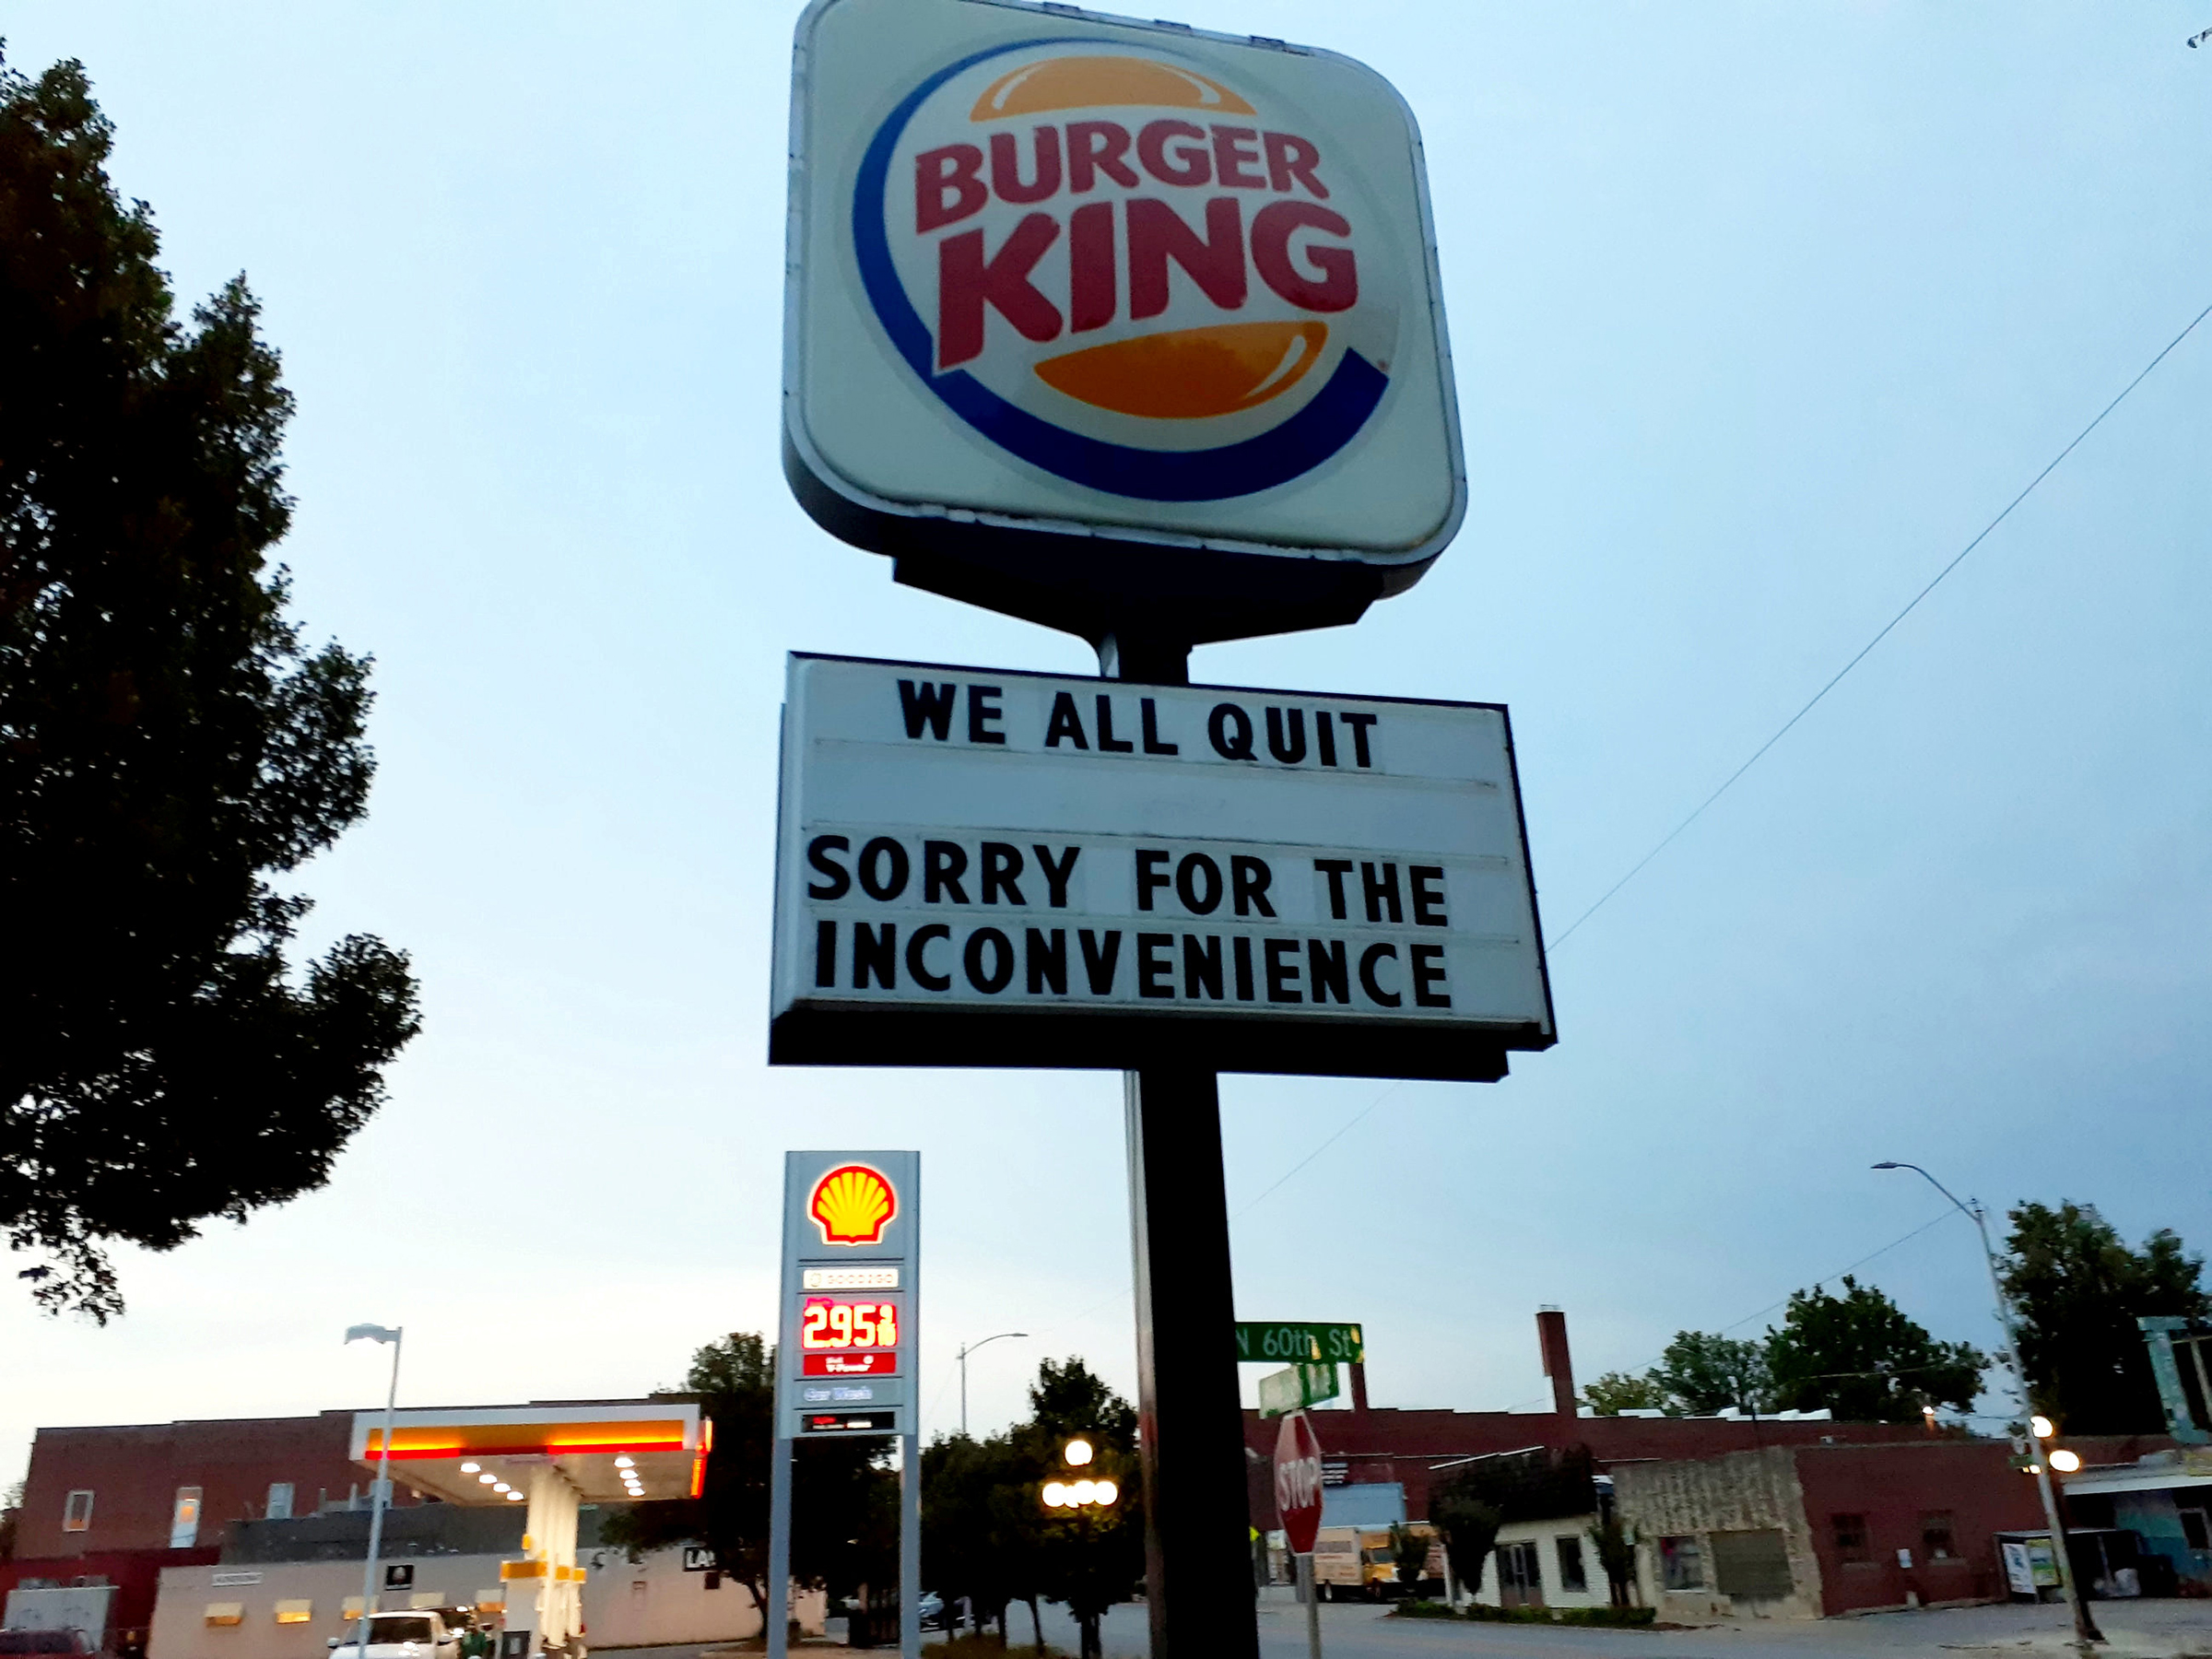 Disgruntled staff at a Burger King announced their resignations by writing 'WE ALL QUIT' on the sign outside the restaurant - which has now gone viral. See SWNS story SWOCsign. General manager Rachael Flores, 25, and her team were sick of poor working conditions and mistreatment from upper management so decided to leave. Last Saturday (10/07), the day before her she finished her notice period, Rachael changed the sign outside the restaurant in Lincoln, Nebraska, to read 'WE ALL QUIT' and 'SORRY FOR THE INCONVENIENCE'. She ended up being fired that day as a result, but for her it was so worth it.